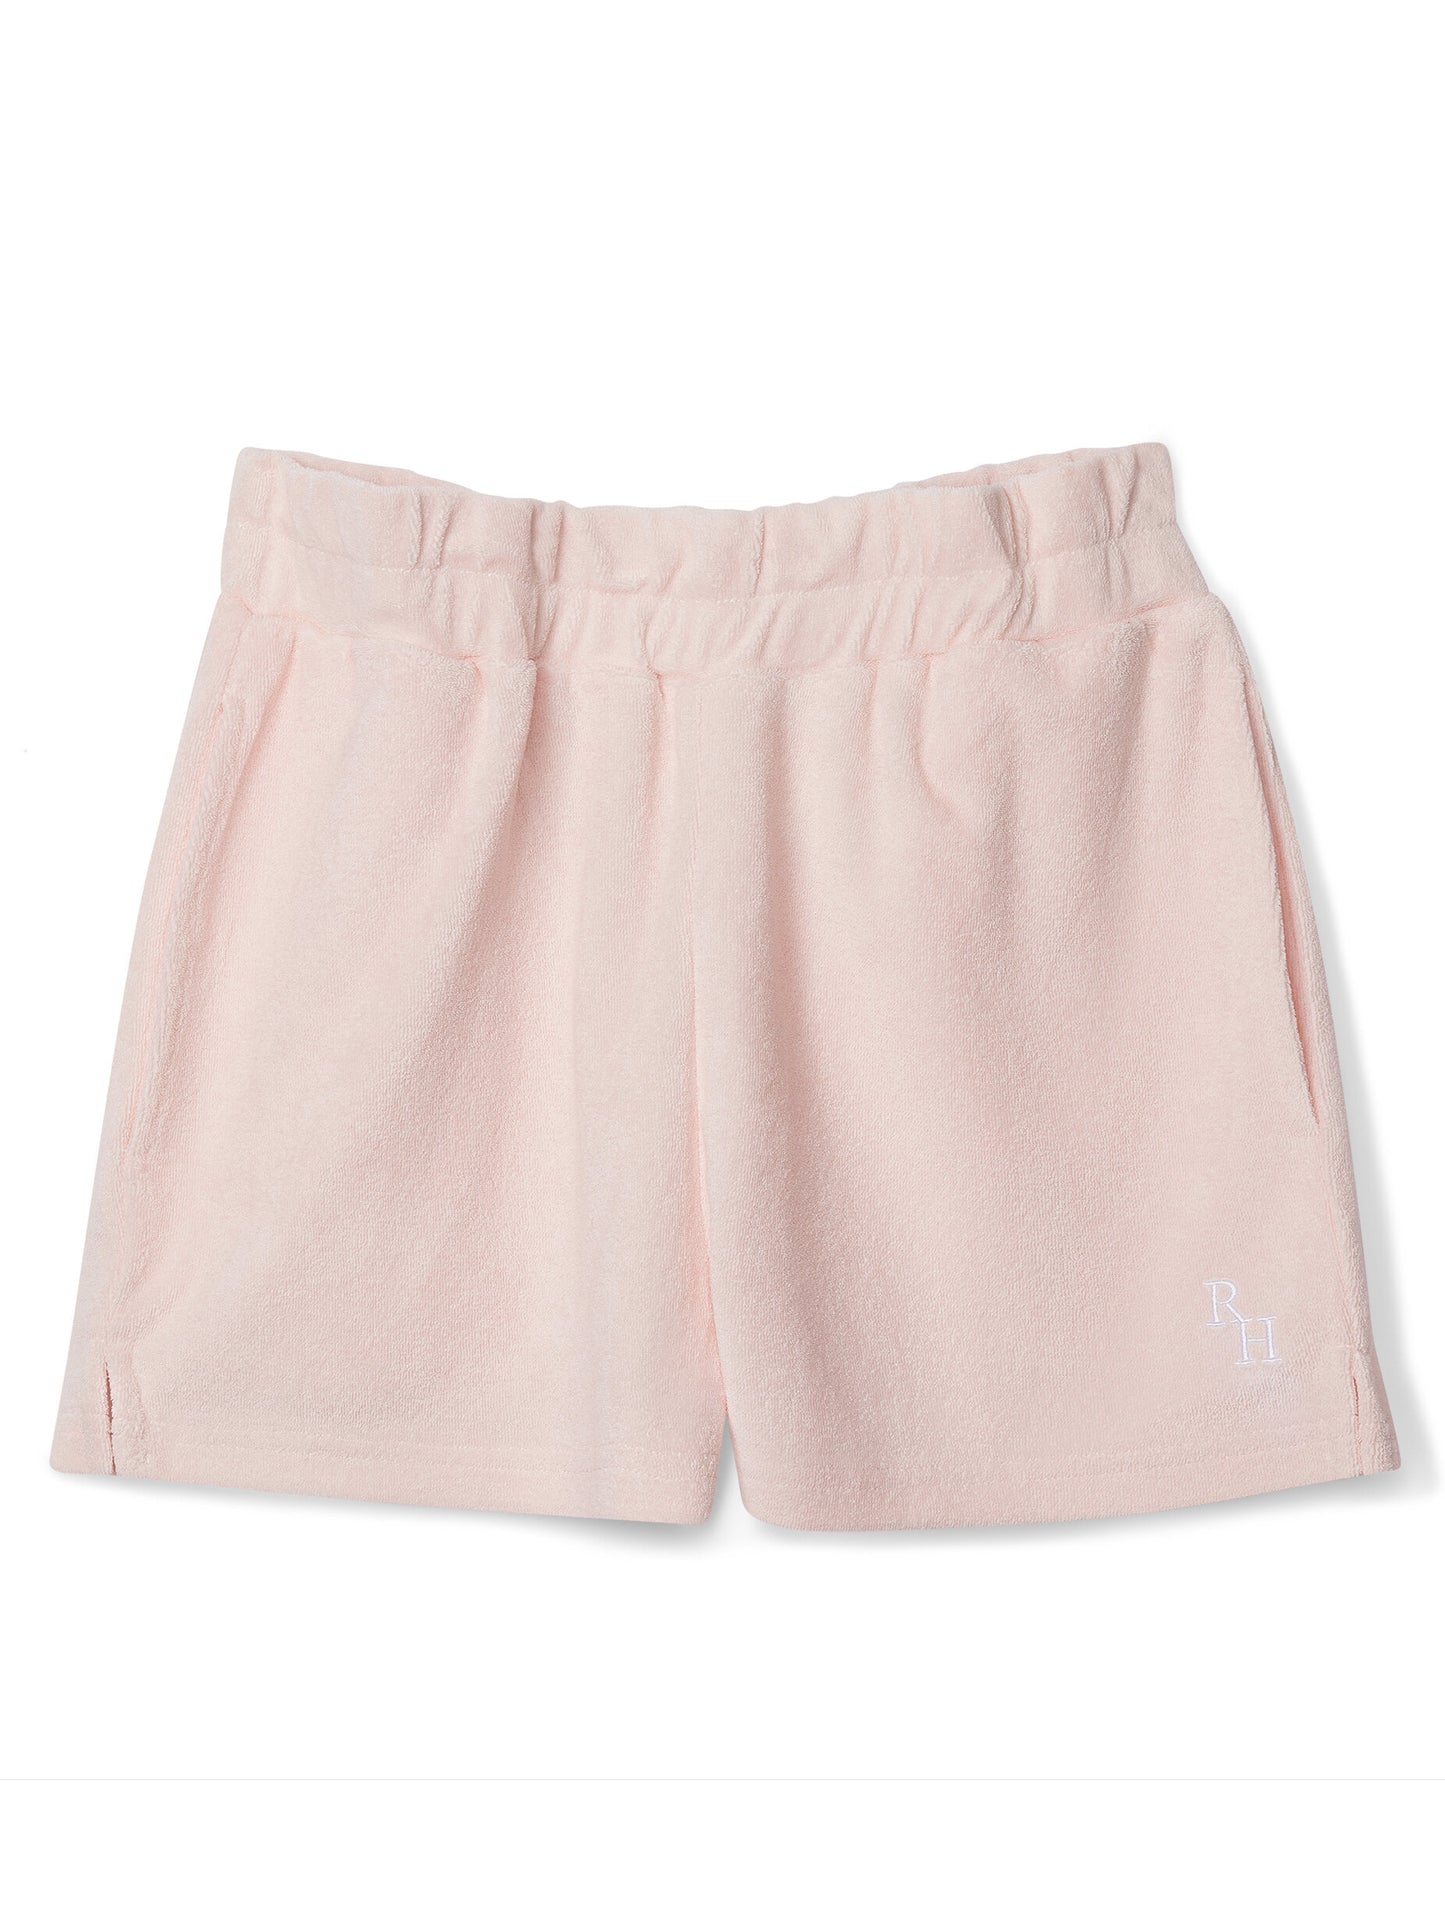 Ace Terry Short in Pink